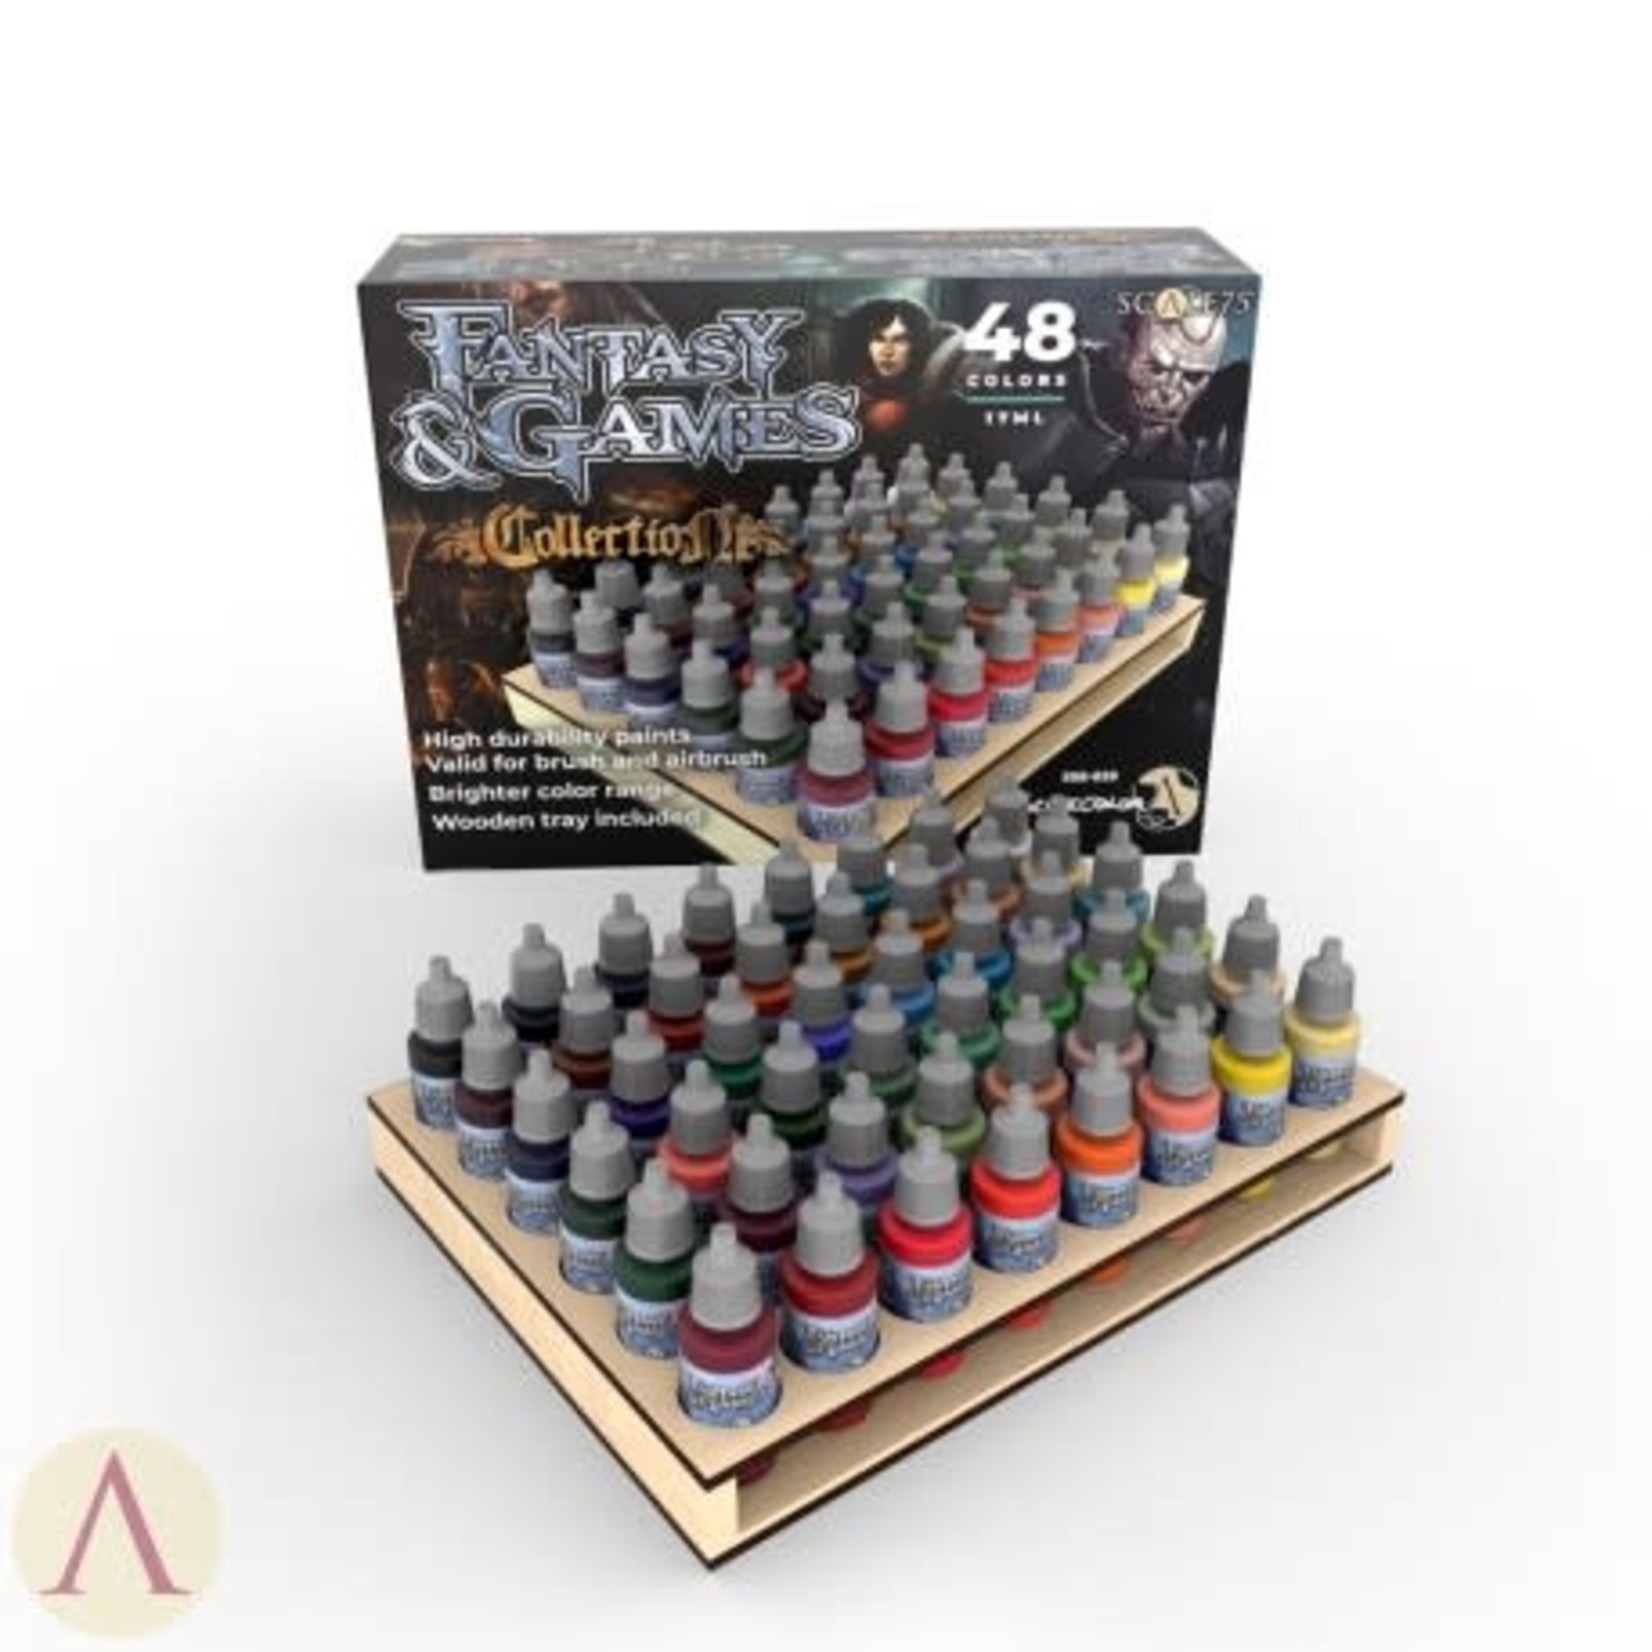 Scale 75 Fantasy and Games Collection SSE020 (48) Set